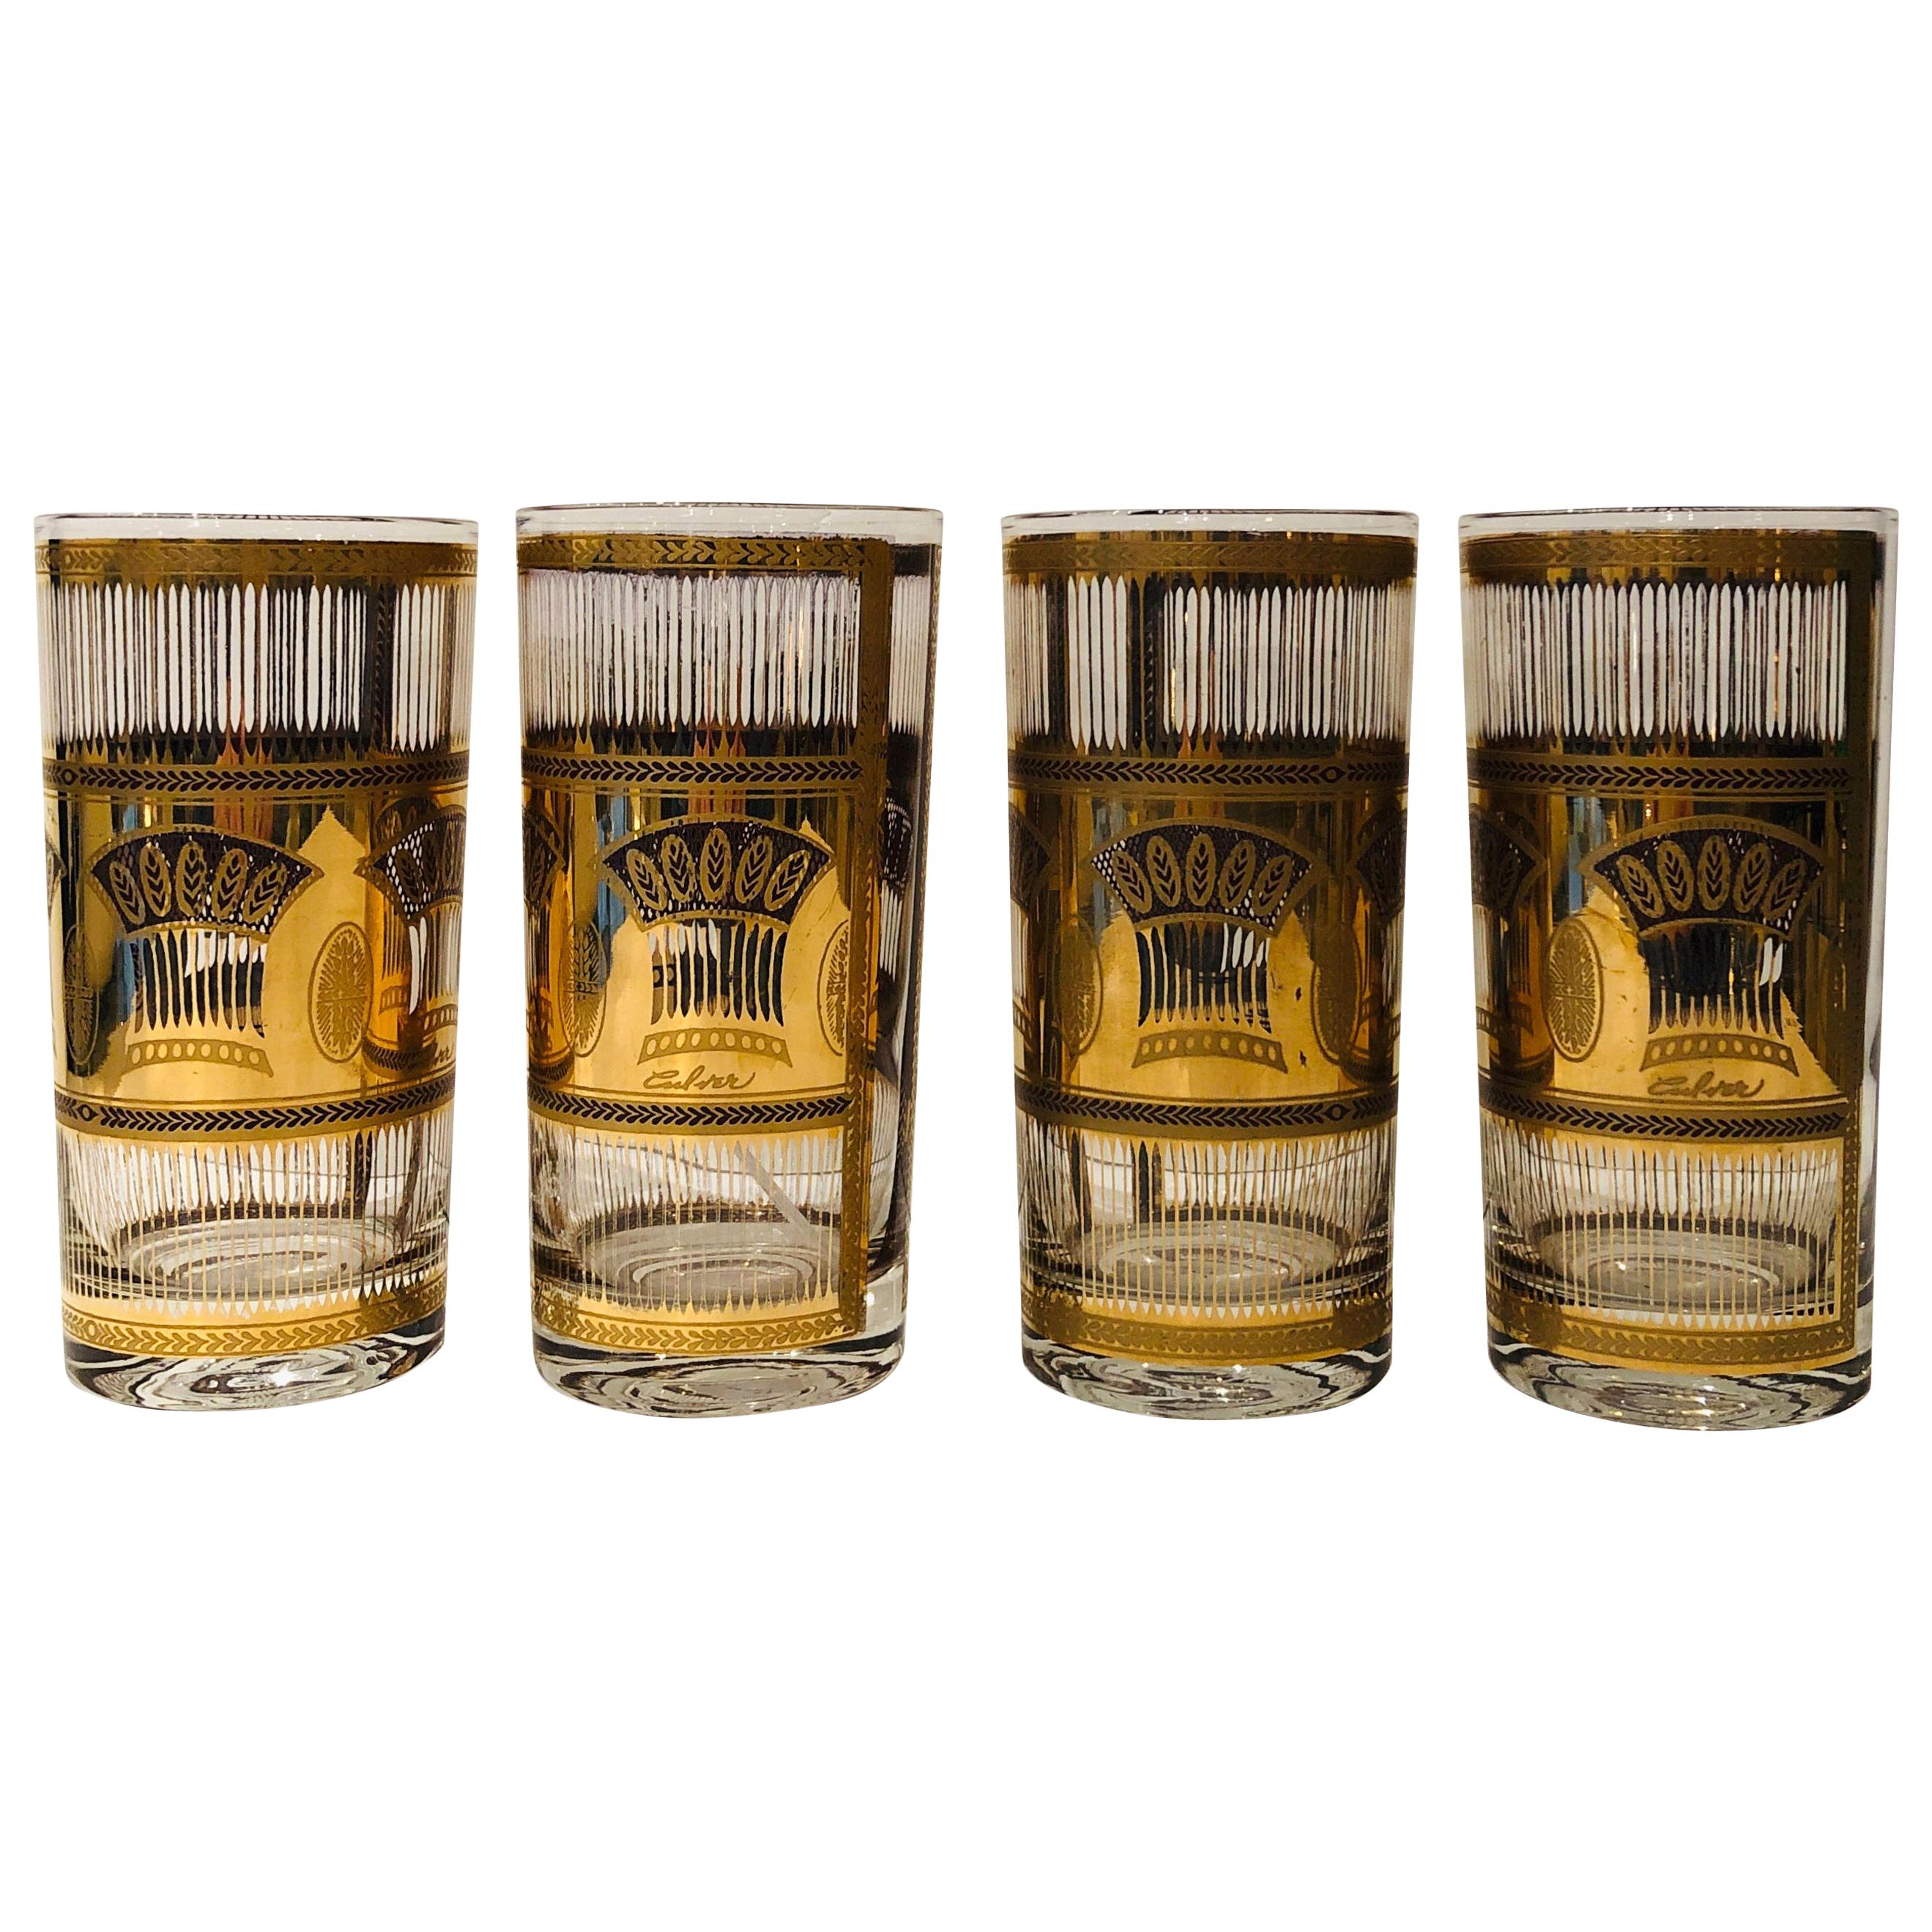 https://a.1stdibscdn.com/set-of-4-culver-gold-gilt-over-glass-wheat-sheath-theme-tall-cocktail-glasses-for-sale/1121189/f_126358021597165641807/12635802_master.jpg